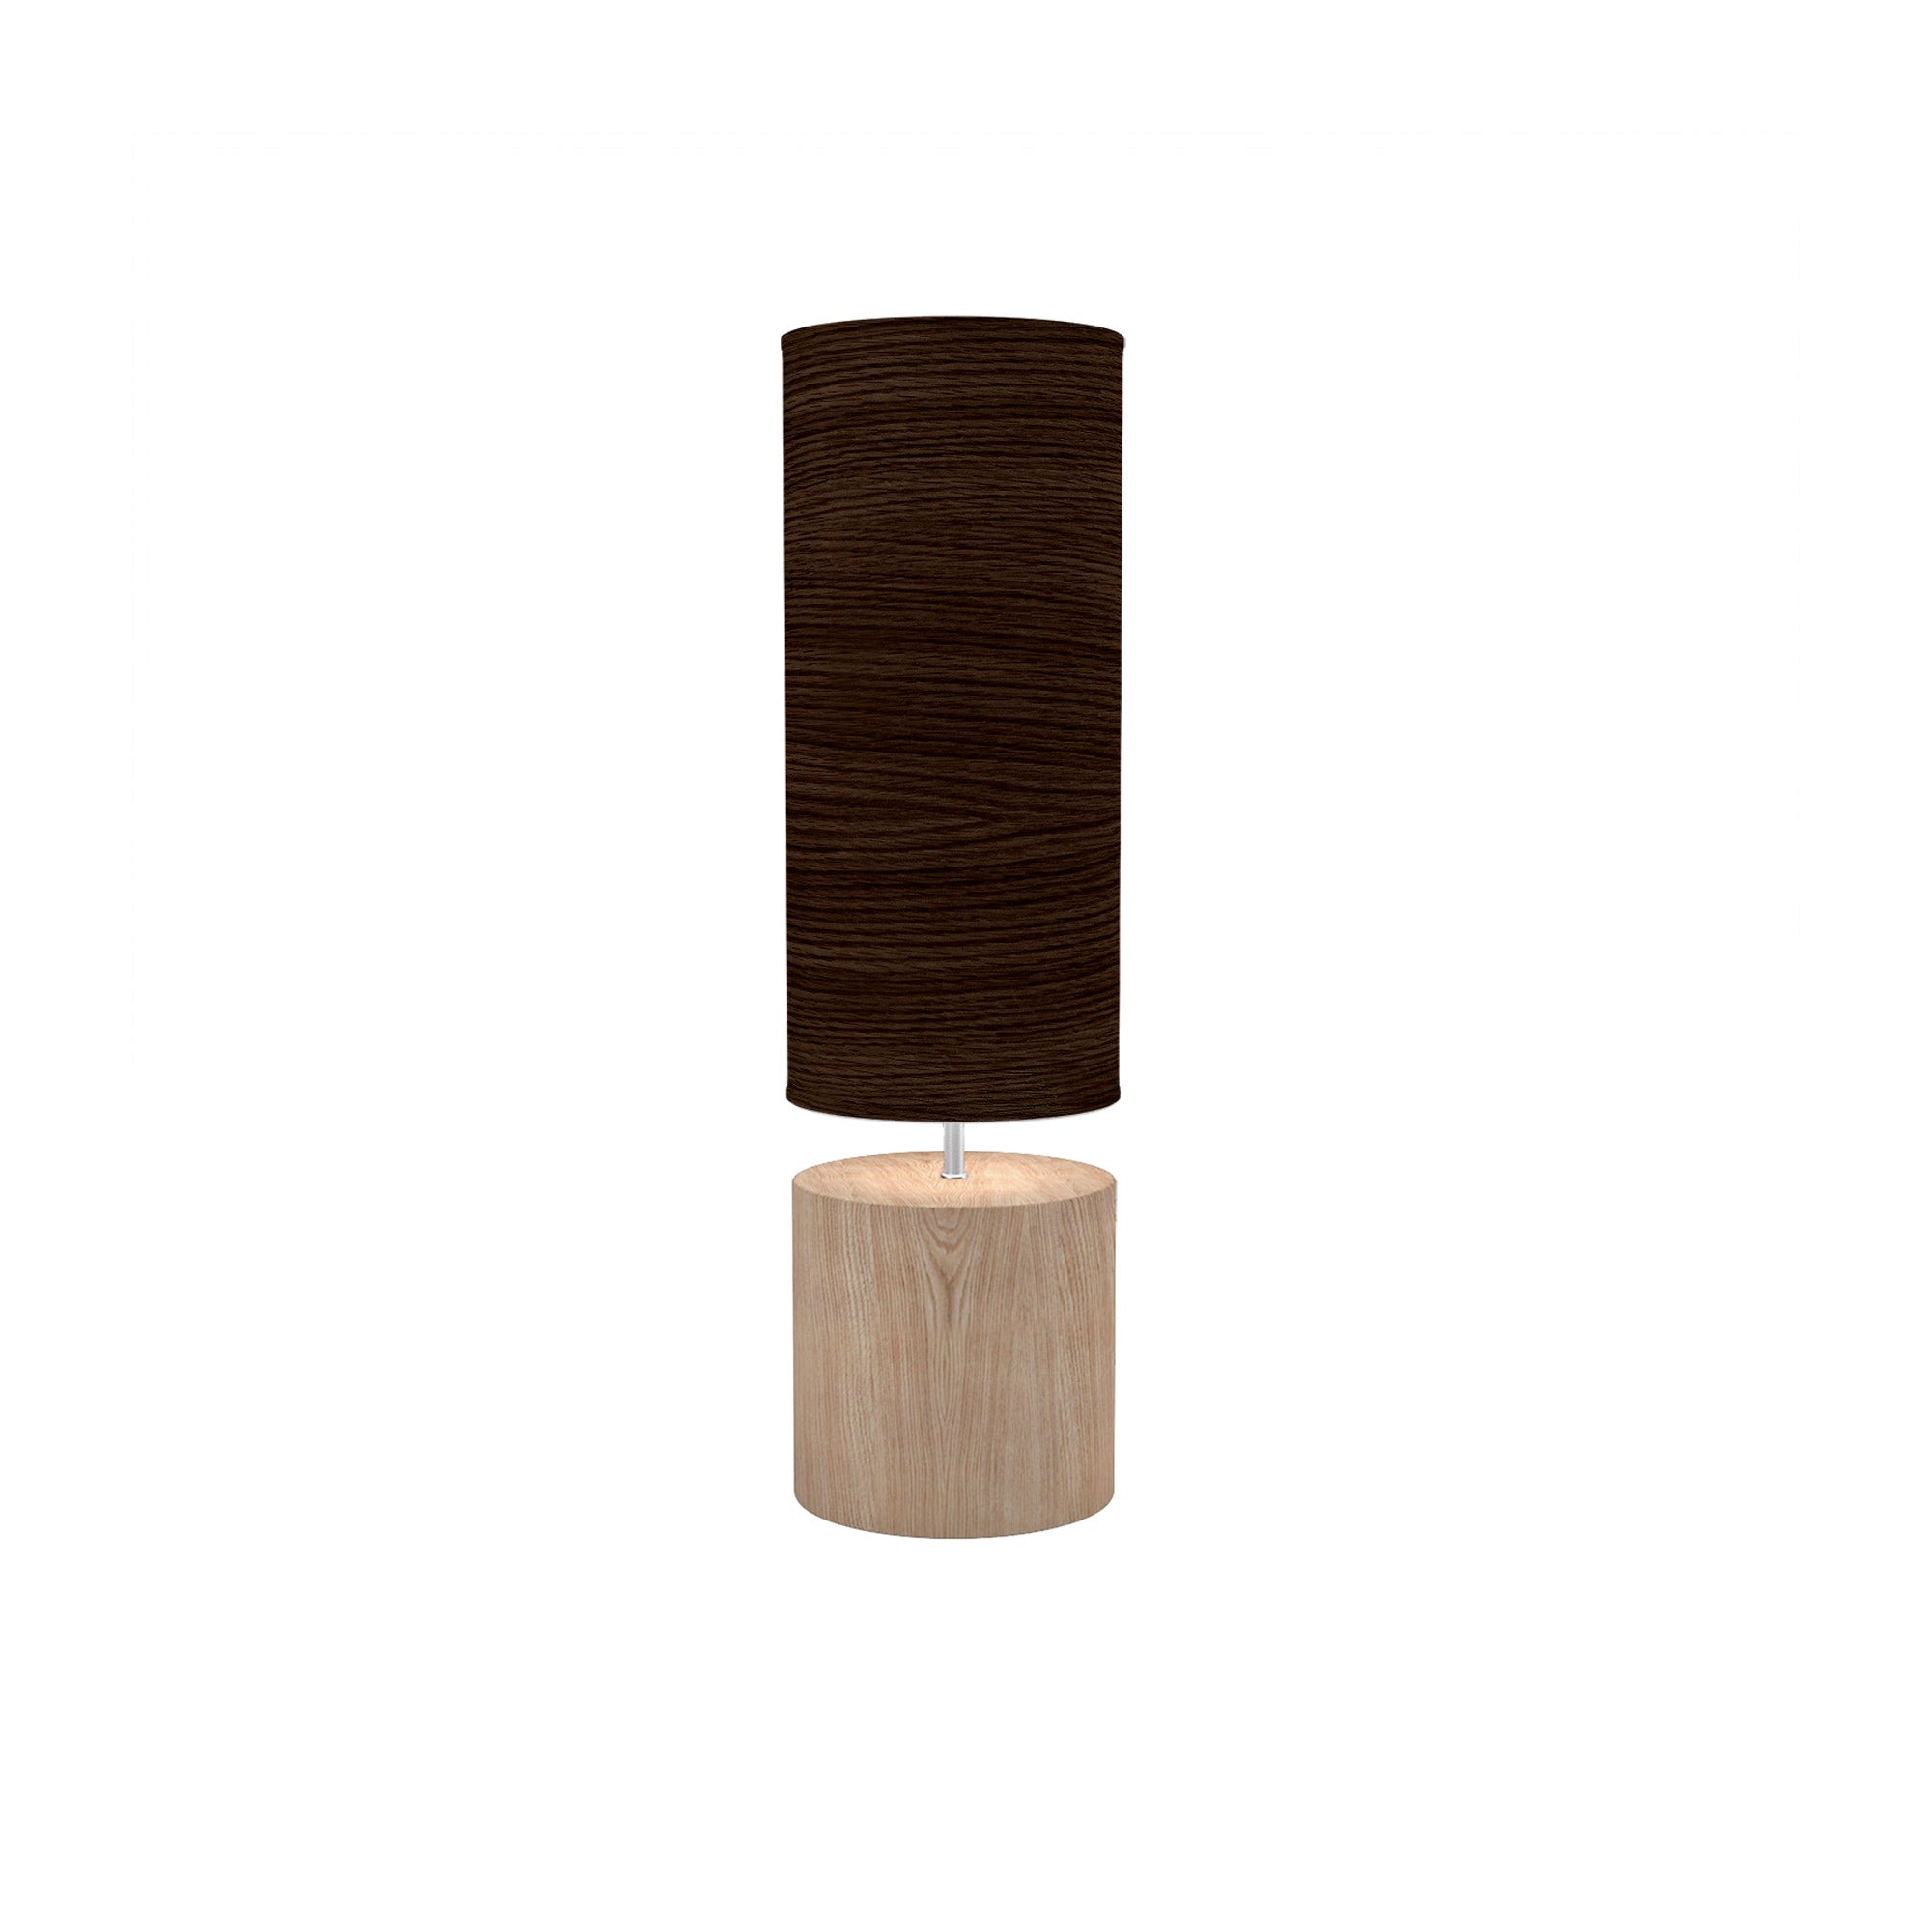 The Laurie Table Lamp from Seascape Fixtures with the natural base with photo veneer shade in chocolate color.